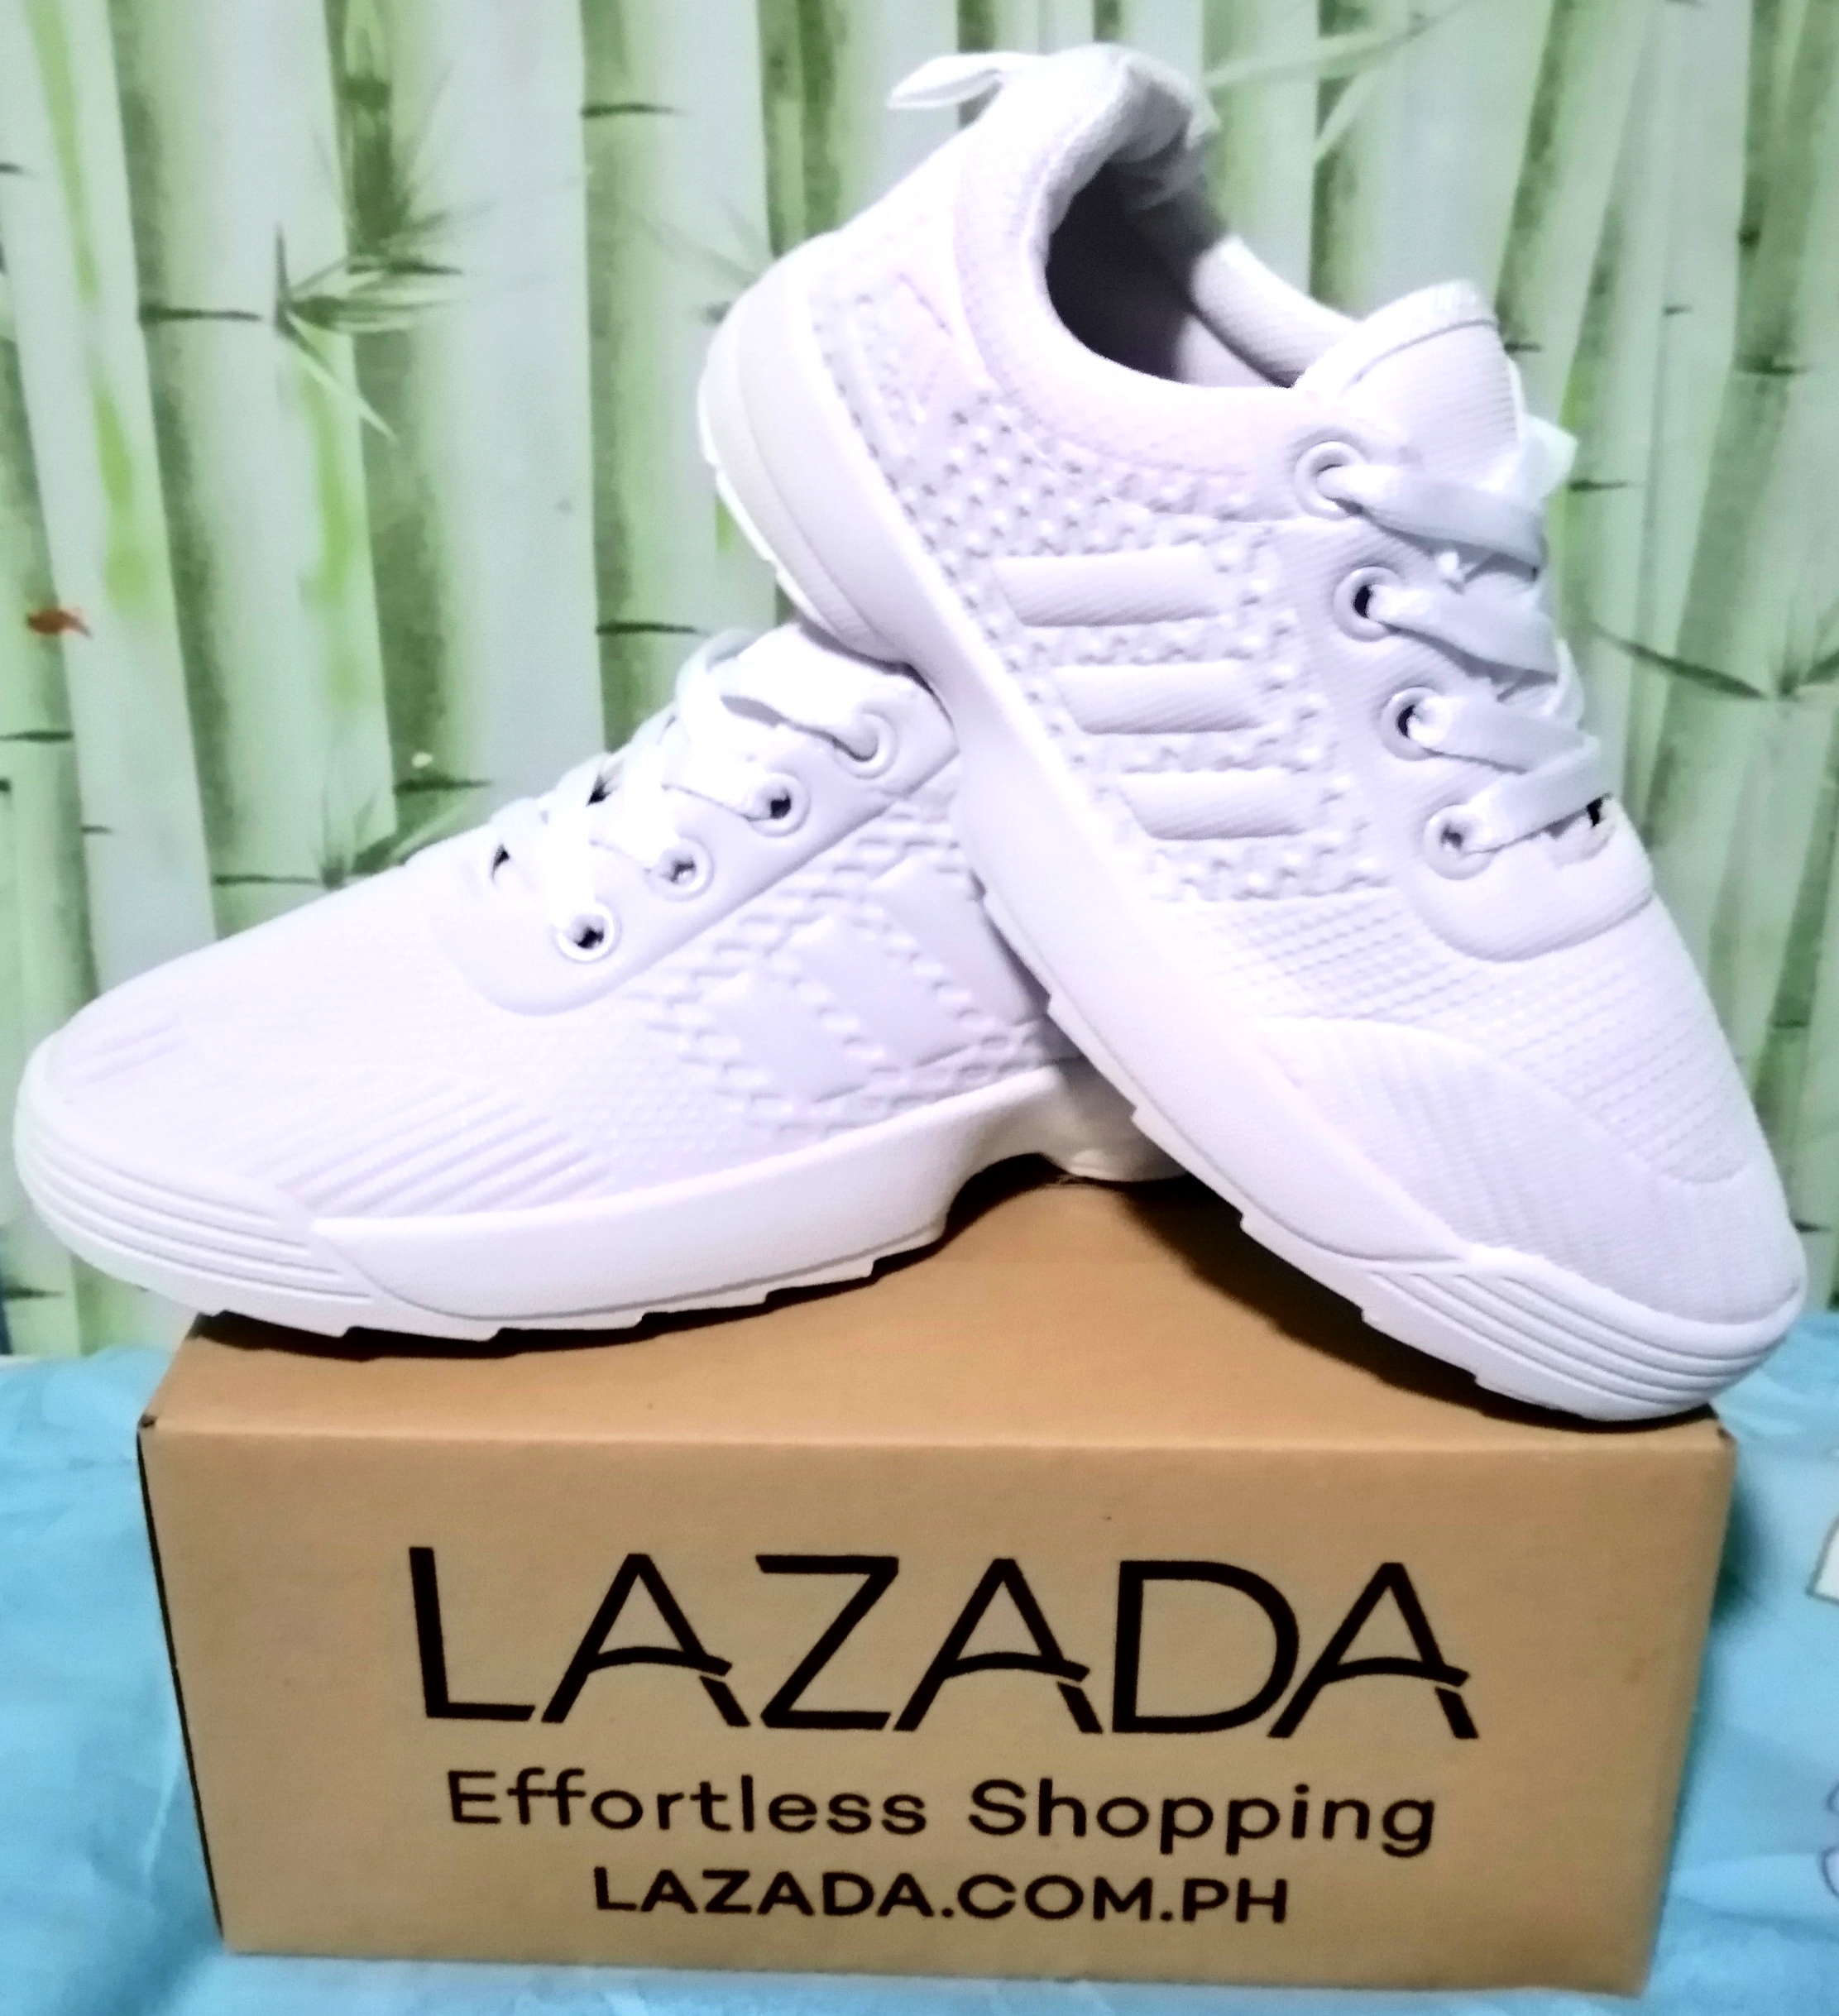 NEW SPORT SHOES FOR KIDS SIZE 30 TO 35 